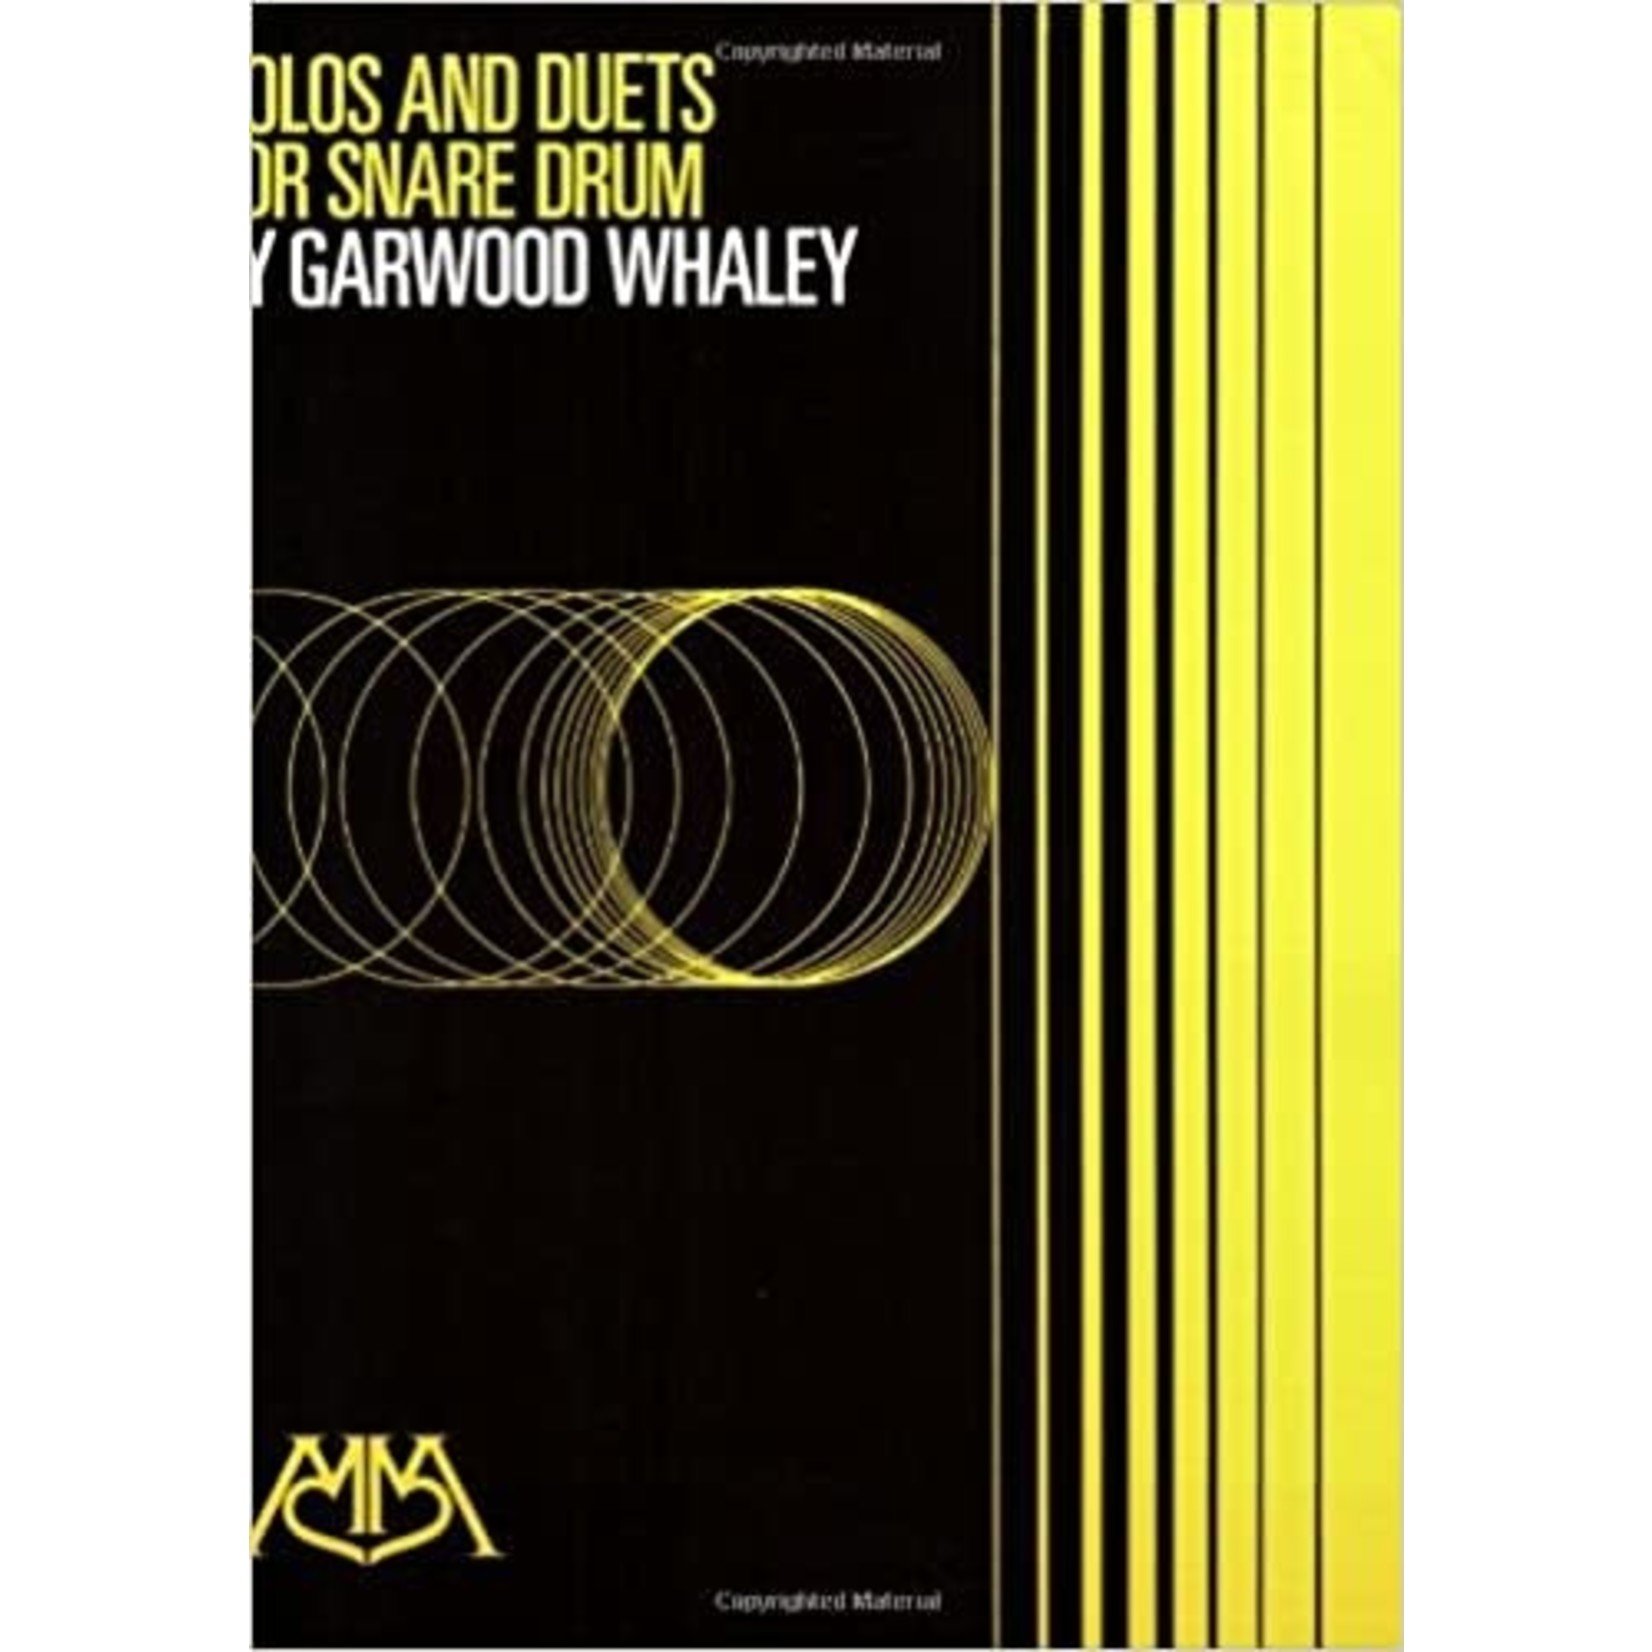 Hal Leonard SOLOS AND DUETS FOR SNARE DRUM - GARWOOD WHALEY